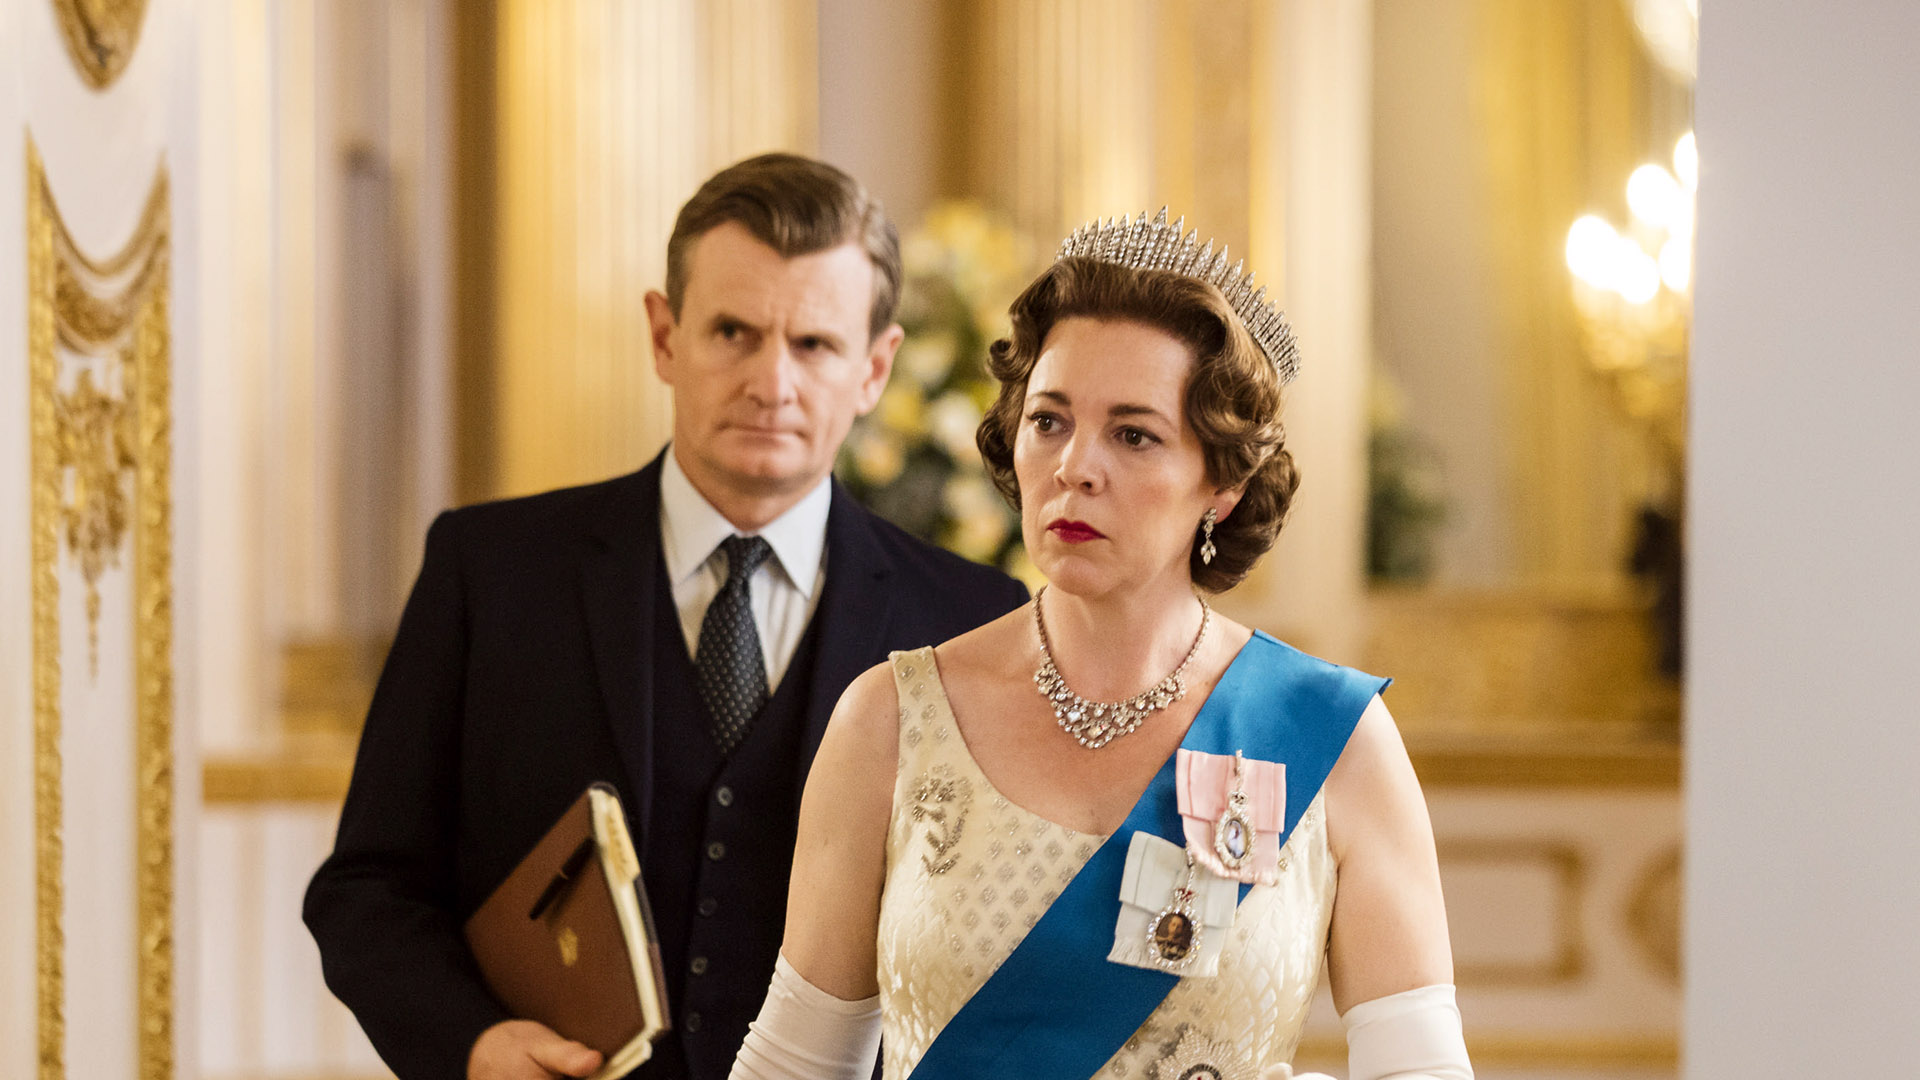 Not Just The Crown: 7 British Royal Dramas You Need to Binge-Watch Now